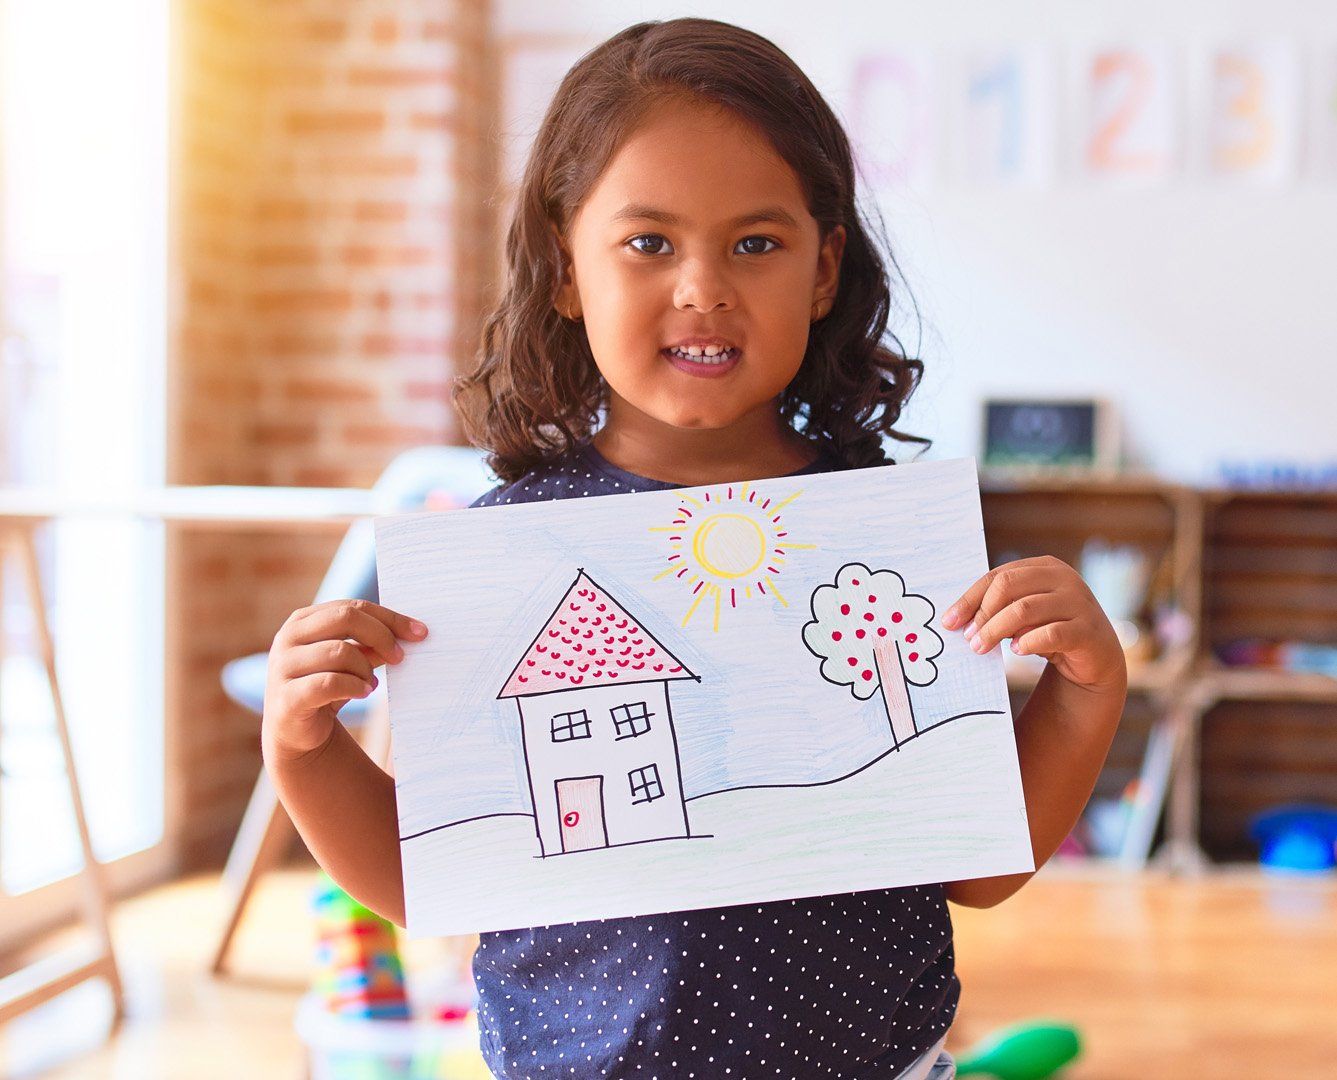 Young girl holding a hand drawn picture of a house on a hill